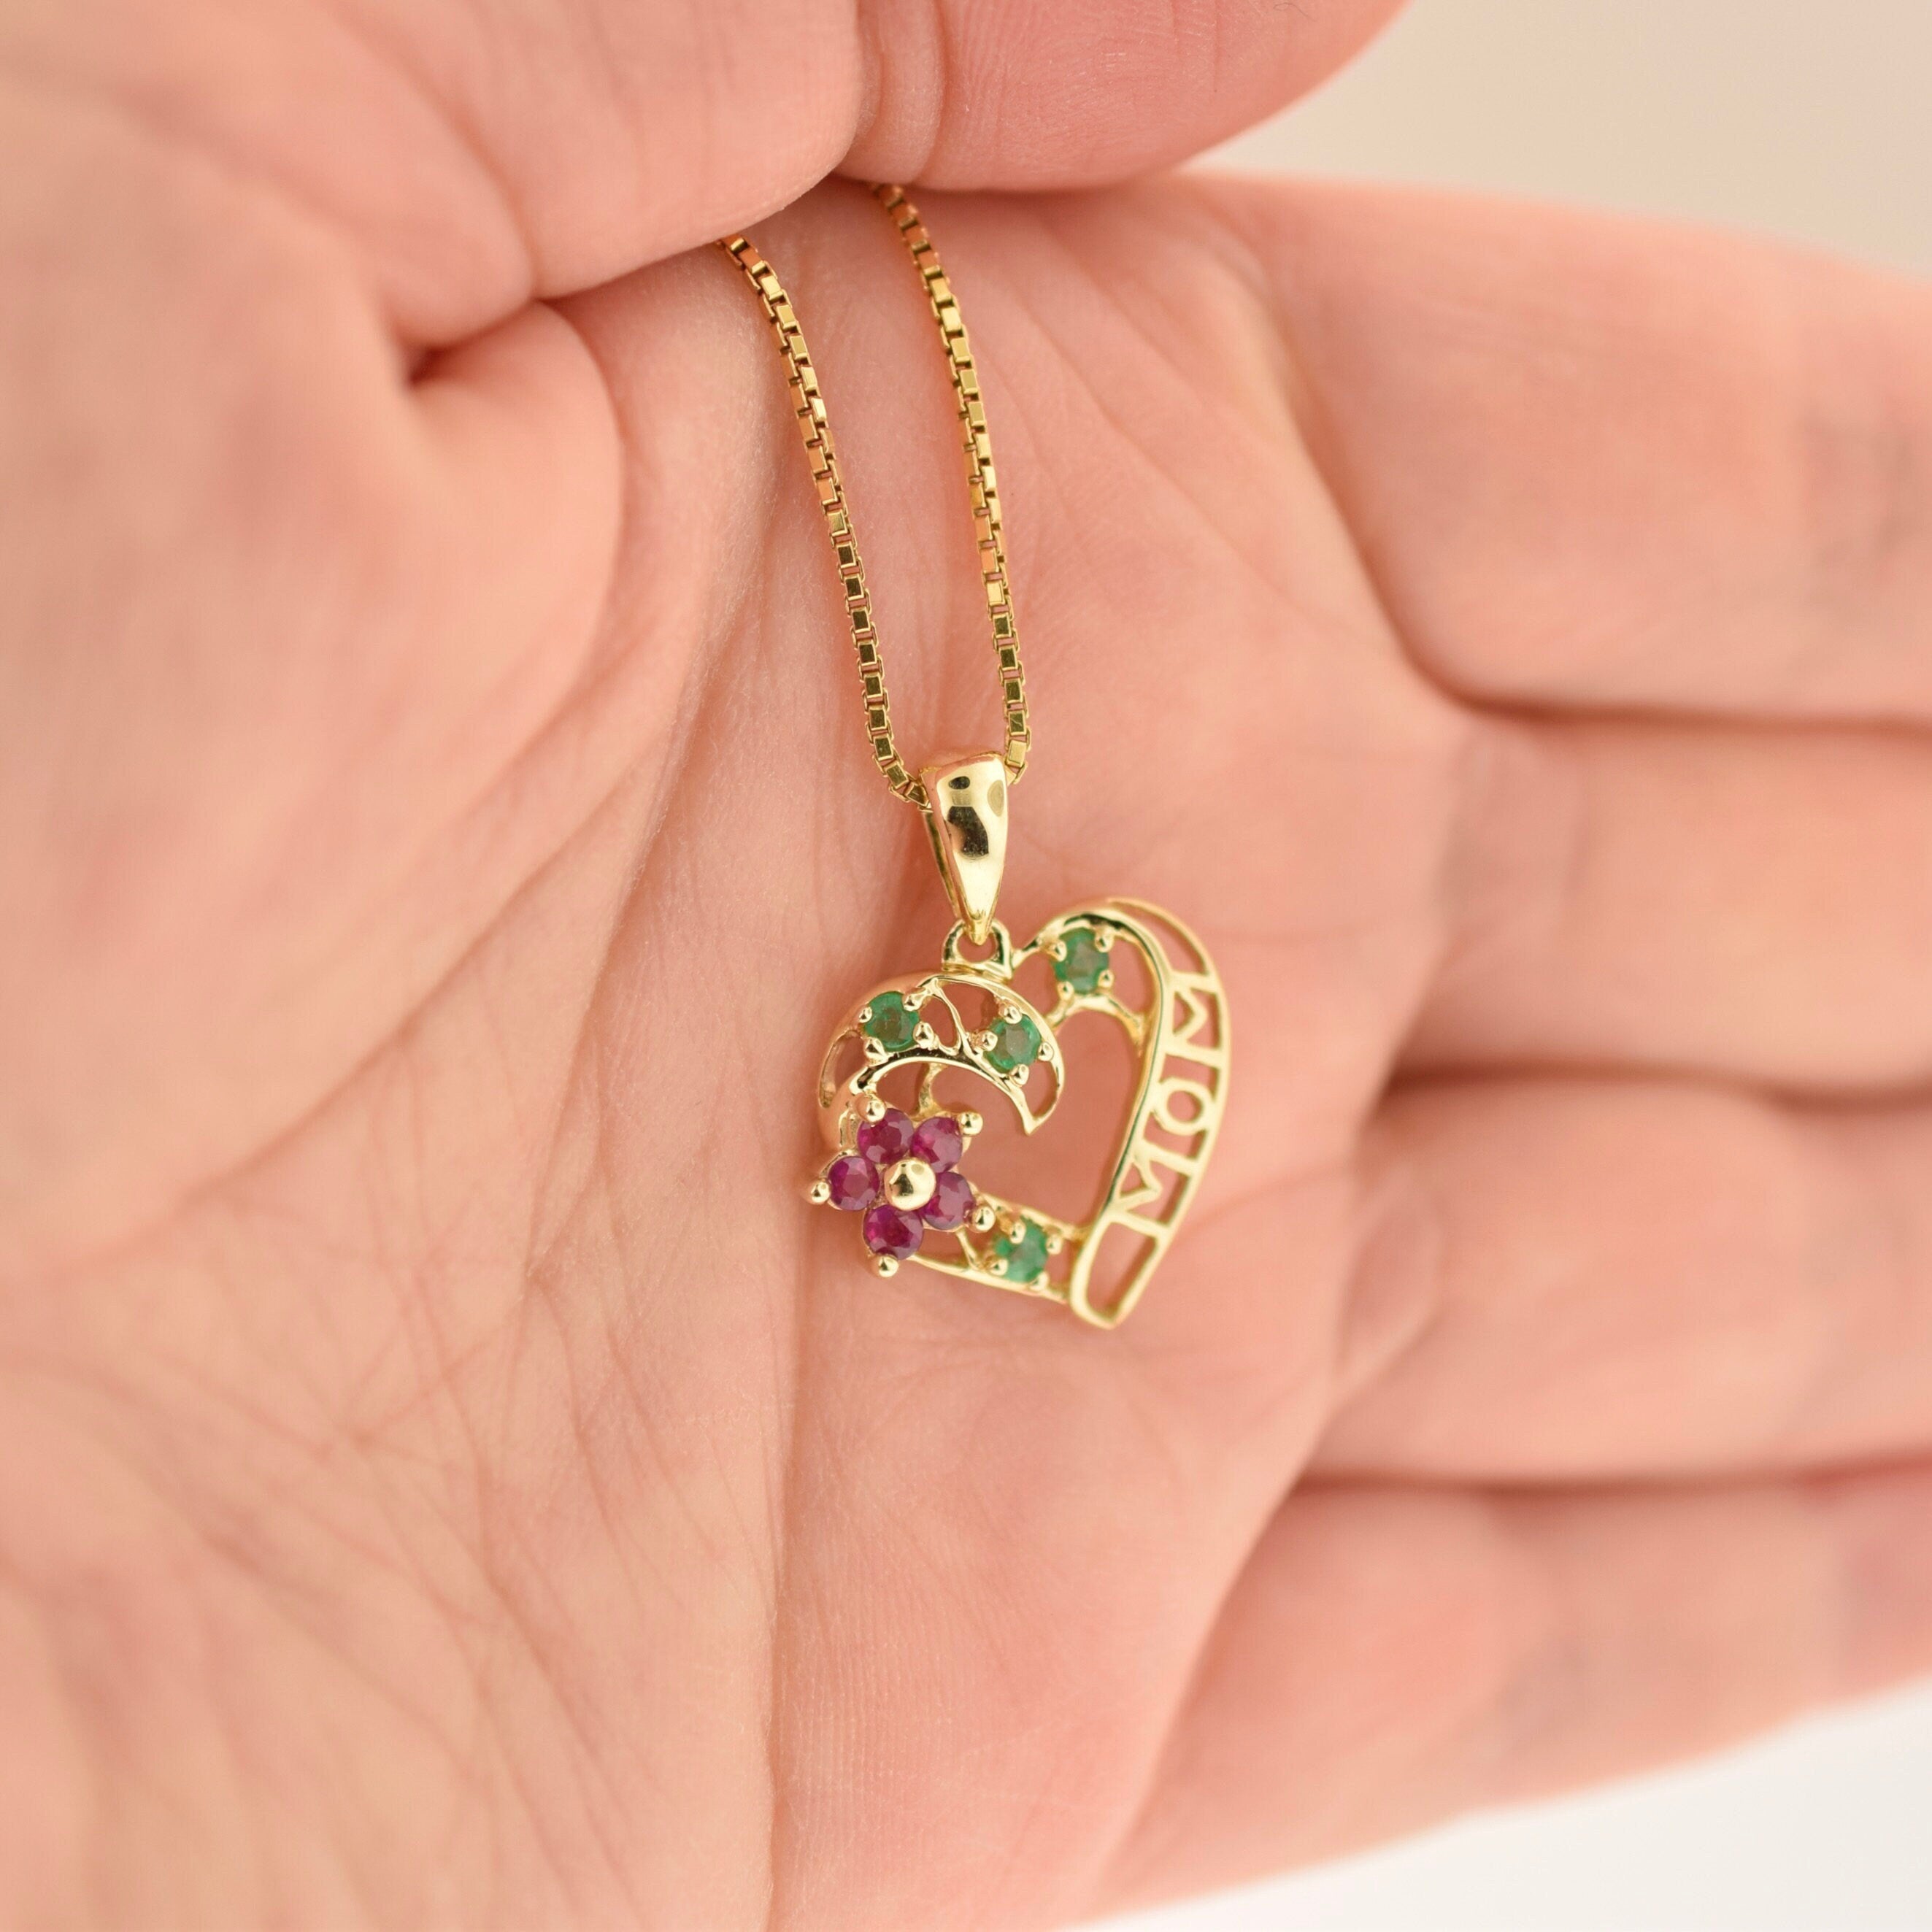 10k Yellow Gold Ruby Heart Mom Pendant. Rutledge Exchange is a Boutique Jewelry and Antiques Business in Historic Downtown Camden SC. We source regionally from Estate Sales, Dealers and Private Sellers.